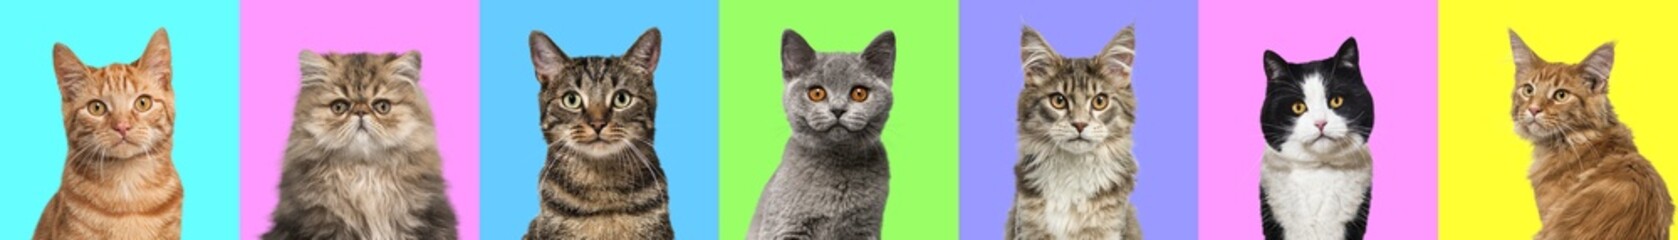 Banner, Collage of multiple cats head portrait photos on a multicolored background of a multitude of different bright colors.